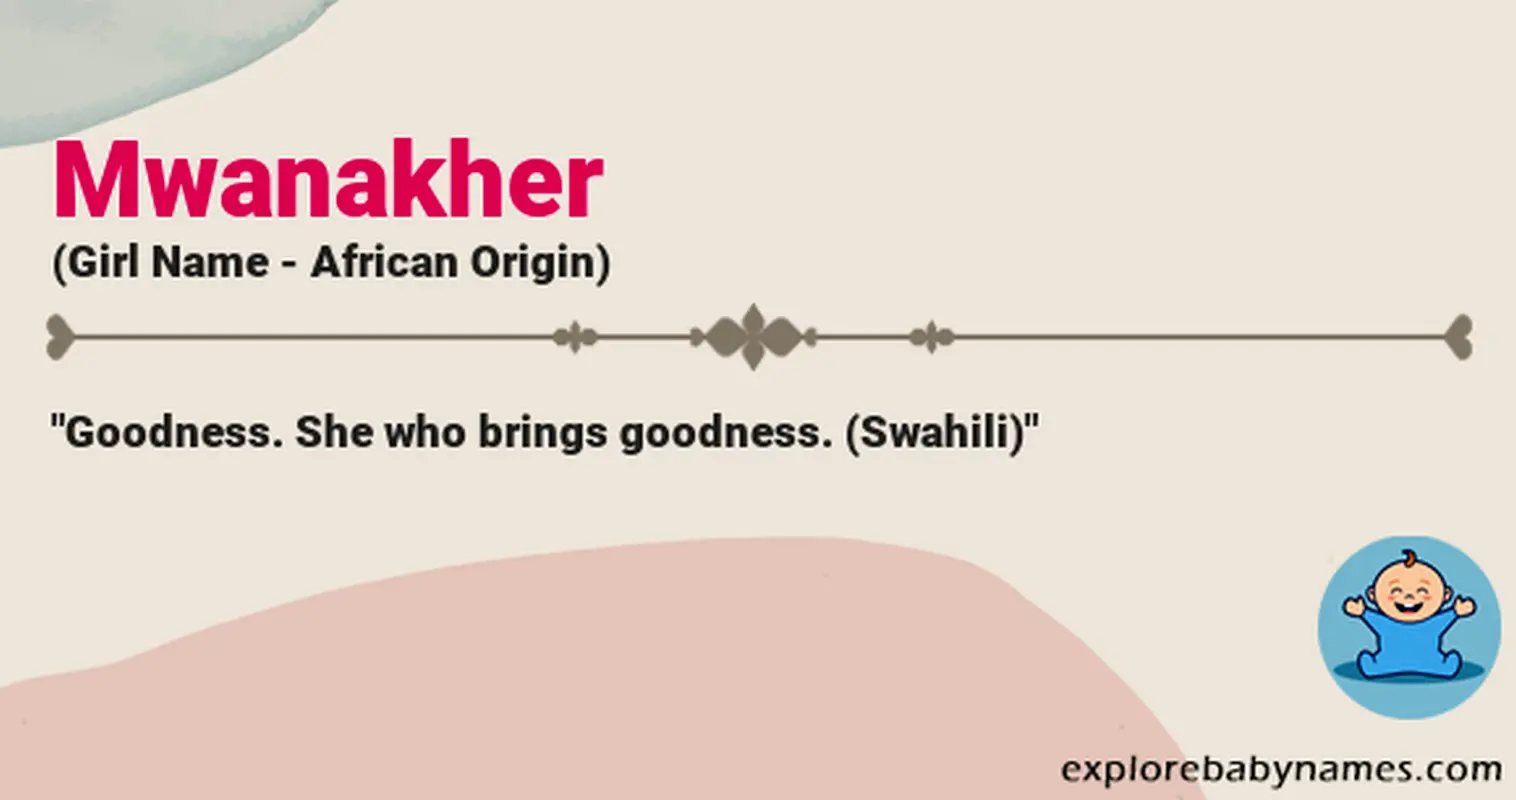 Meaning of Mwanakher